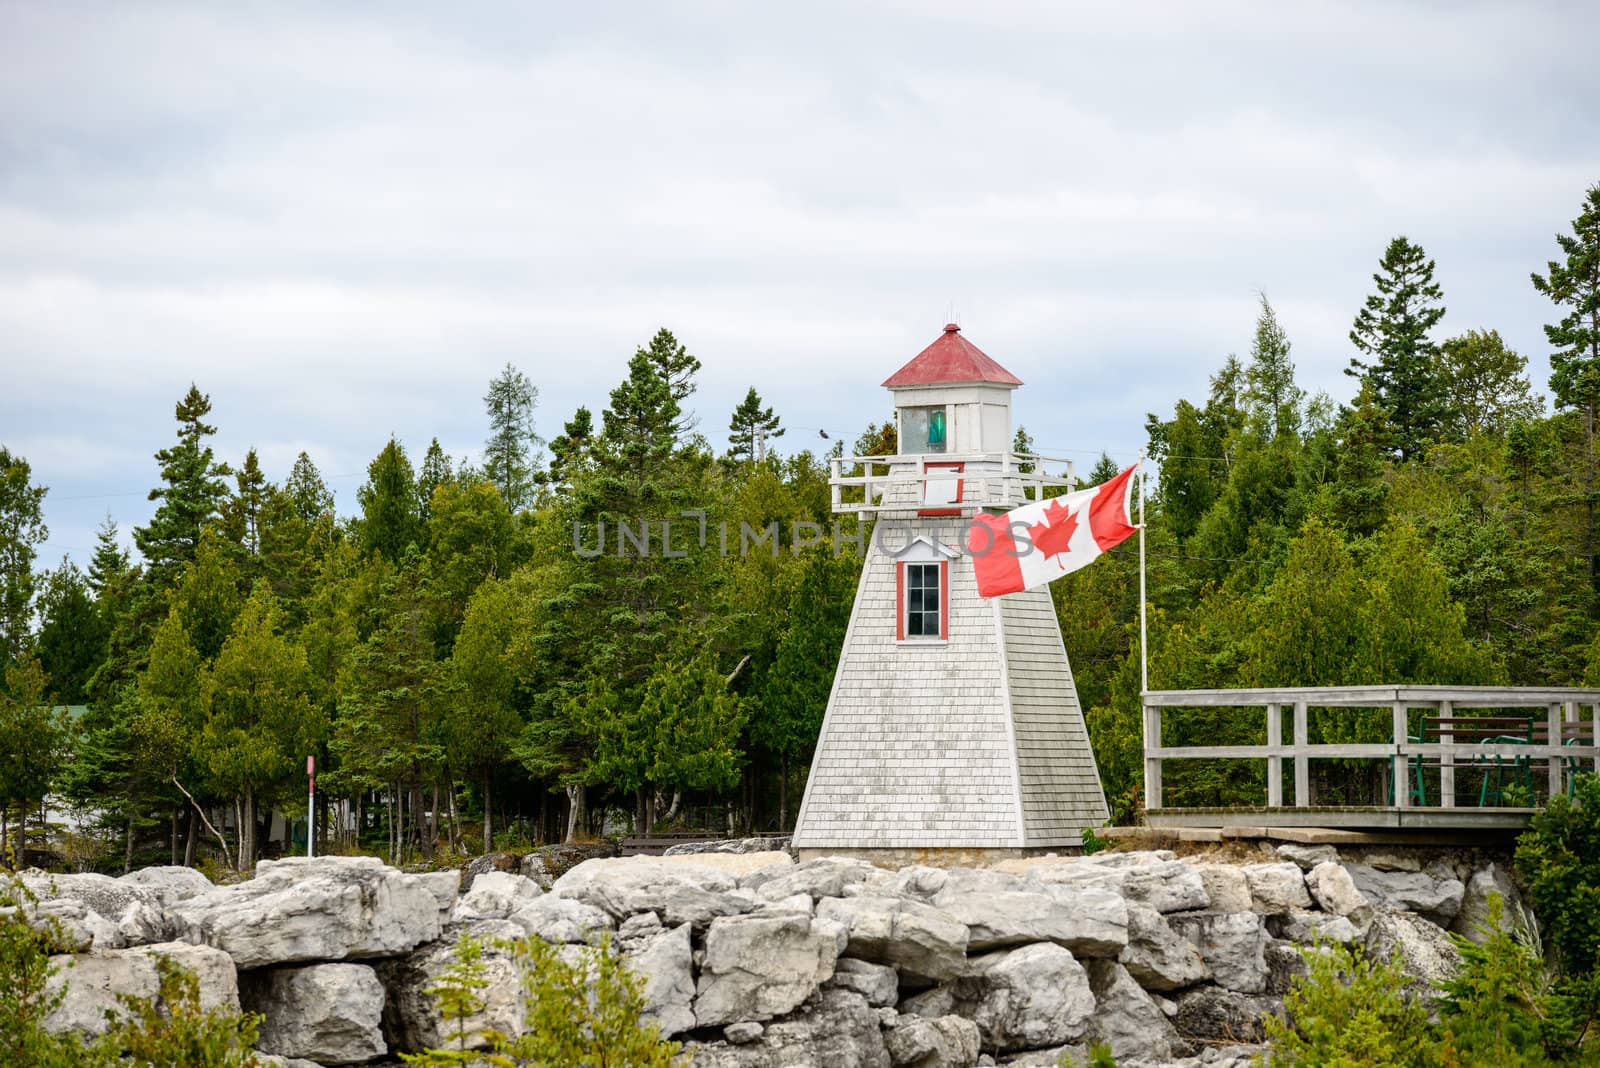 Built in 1898, the South Baymouth range lights rest along a shore reinforced with a low stone wall along the water's edge plus a second, taller wall a few yards back. The lights are nearly identical: white, wood towers angling upward to support square, wooden walkways and lanterns with red caps. Both are marked with a long, red stripe running nearly the height of their front walls to provide day markers for ships approaching the area. The 17 foot tall front range stands close to the water, and the 26-foot-tall rear range is about 250 yards inland, nearly hidden by tall trees.